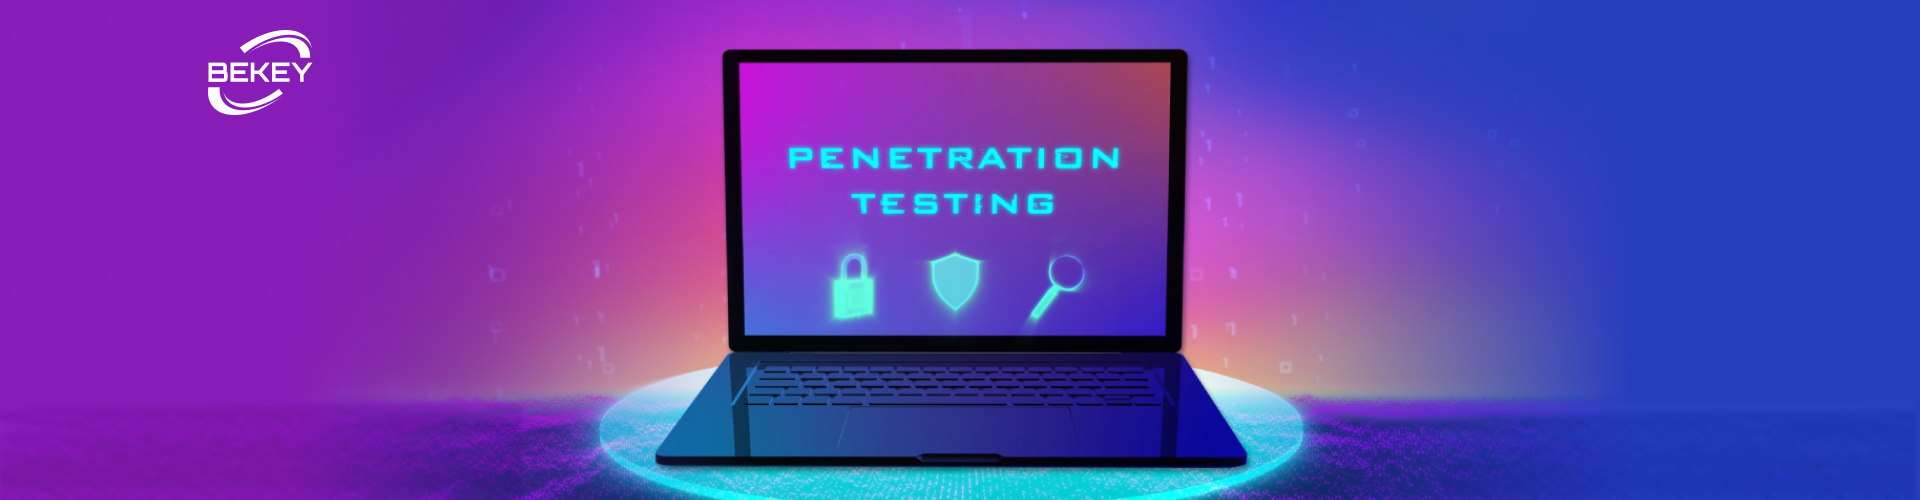 Penetration Testing: Strengthen Your Cyber Defenses - image